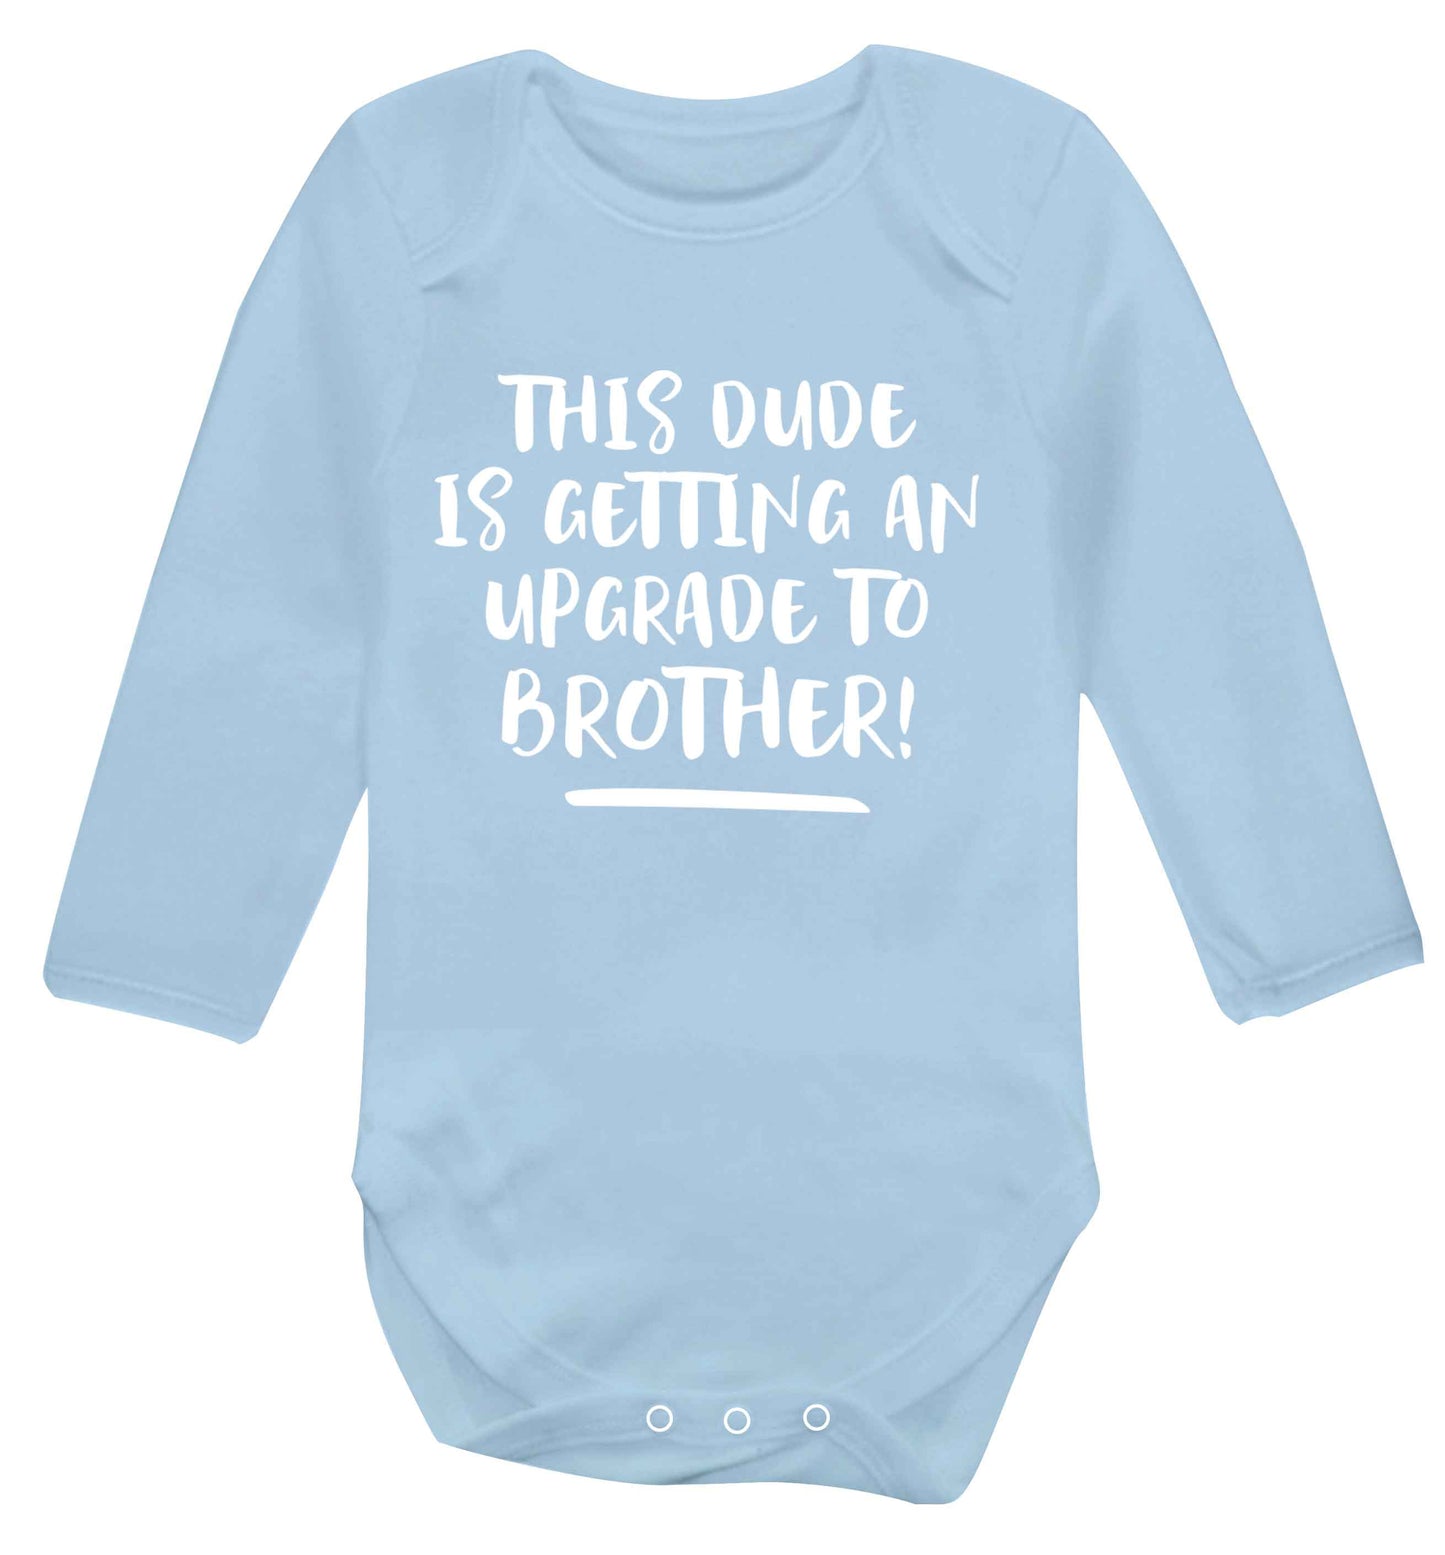 This dude is getting an upgrade to brother! Baby Vest long sleeved pale blue 6-12 months